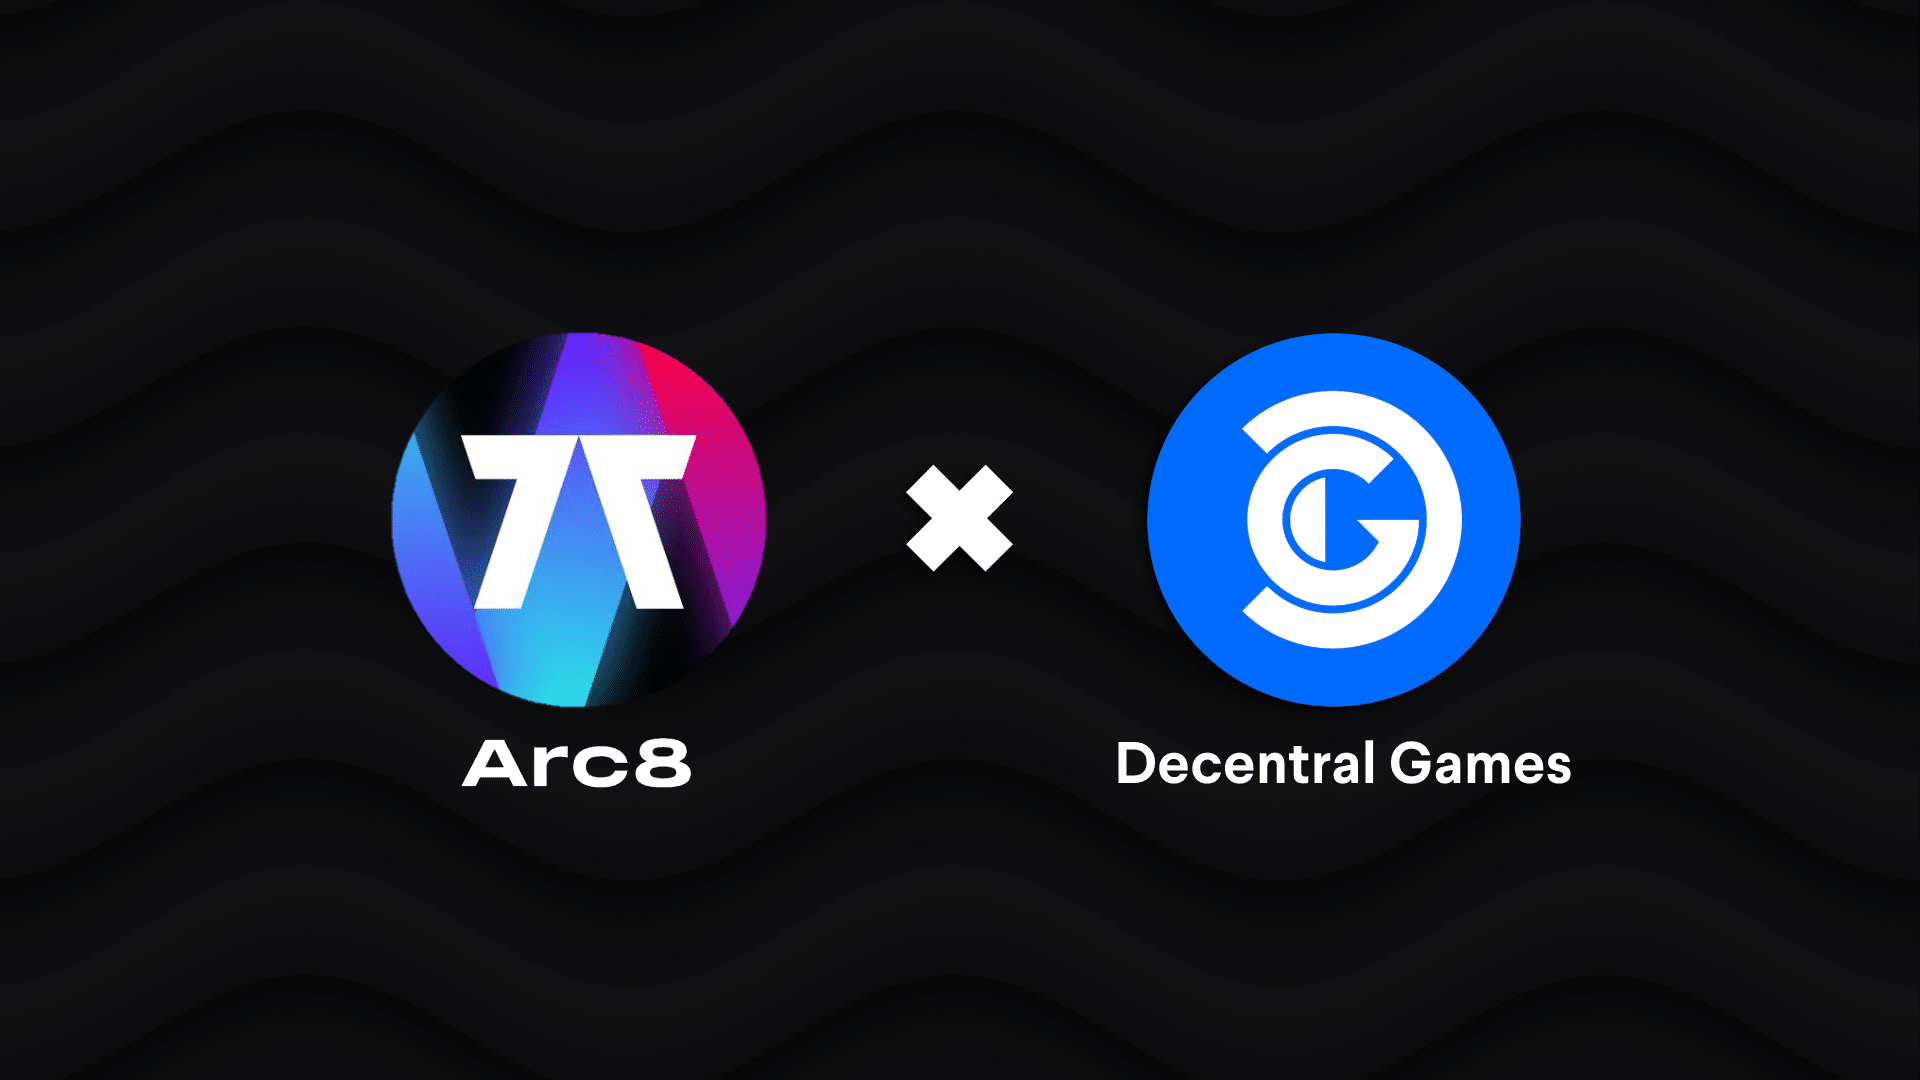 Arc8 and Decentral Games logos